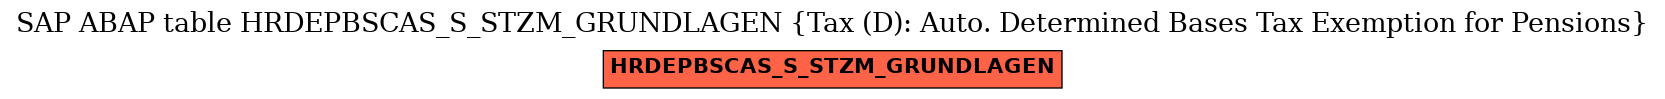 E-R Diagram for table HRDEPBSCAS_S_STZM_GRUNDLAGEN (Tax (D): Auto. Determined Bases Tax Exemption for Pensions)